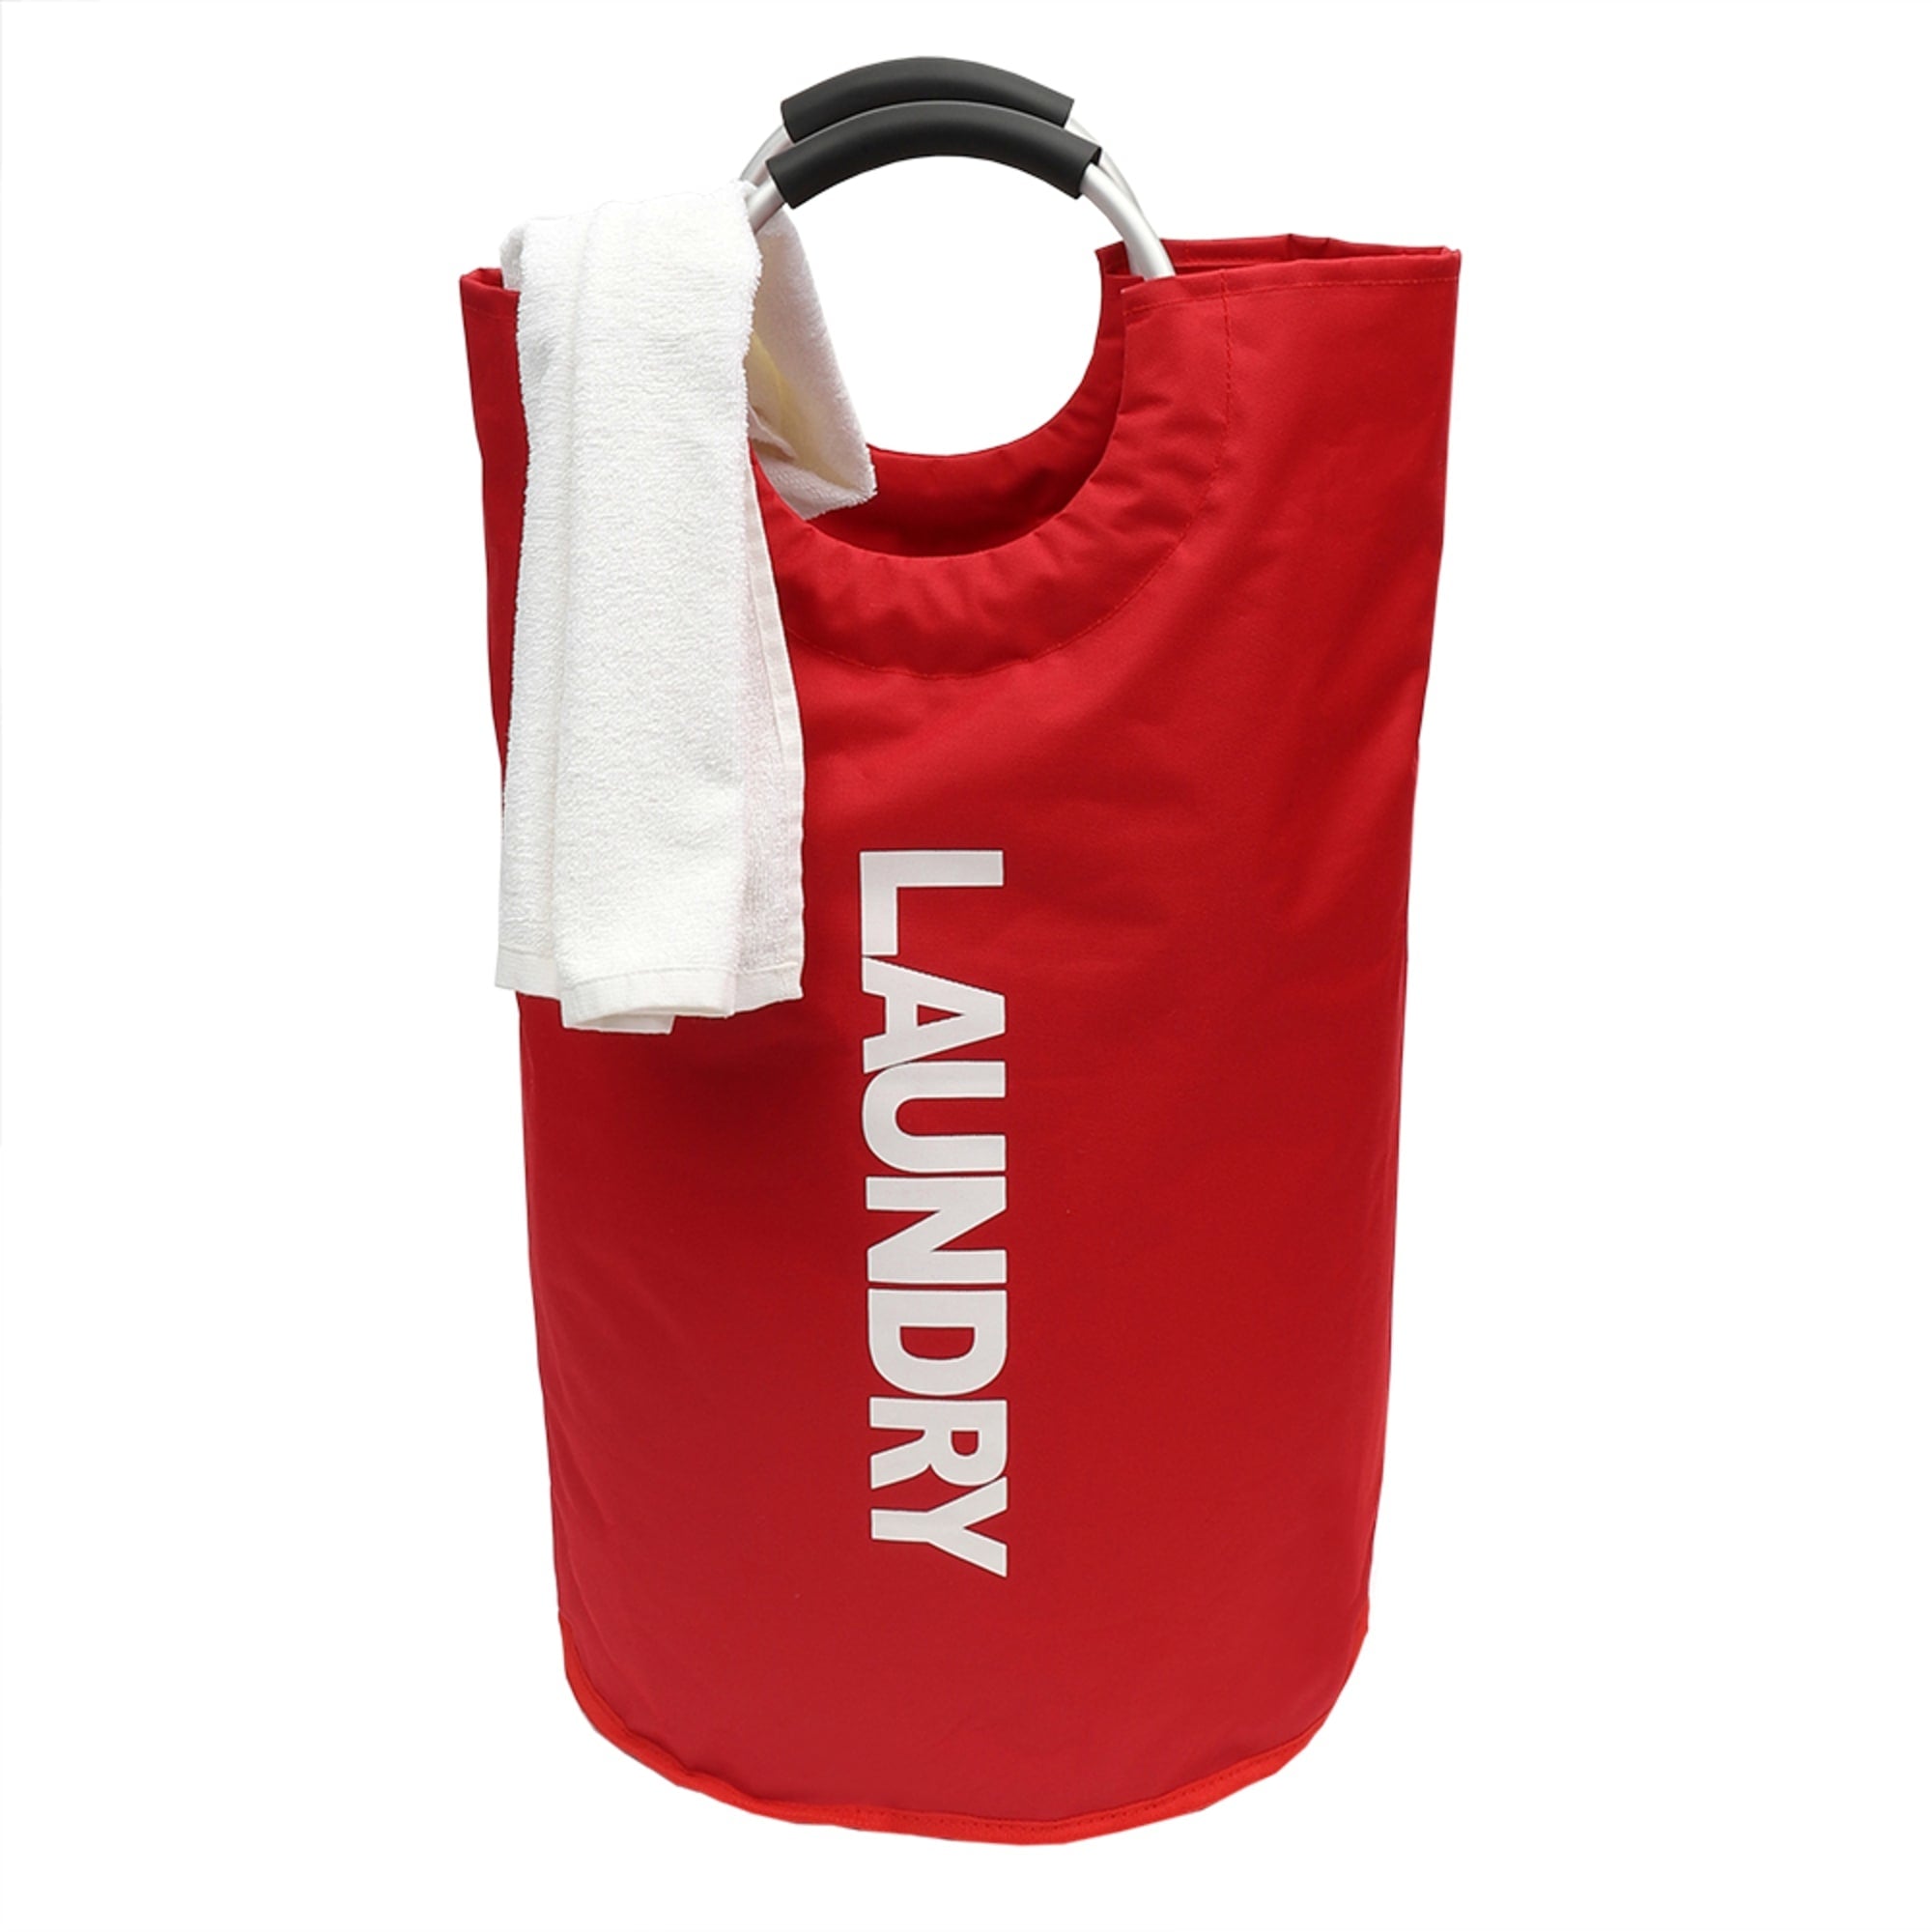 Home Basics Laundry Bag with Soft Grip Handle, Red $12.00 EACH, CASE PACK OF 12